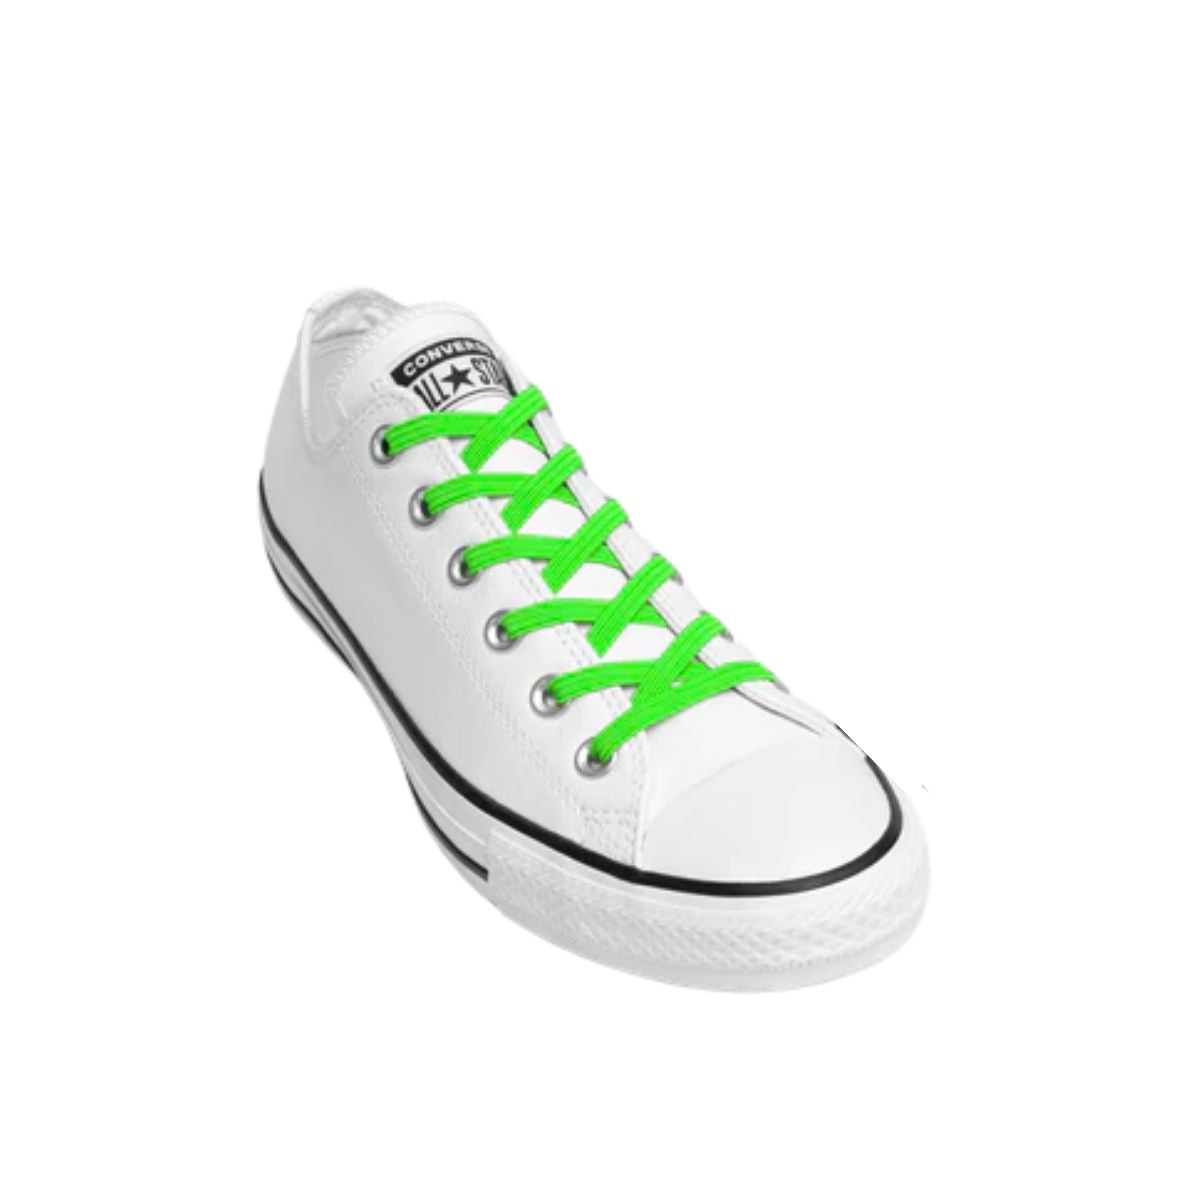 Replacement for Shoe Laces Green No-Tie Shoelaces